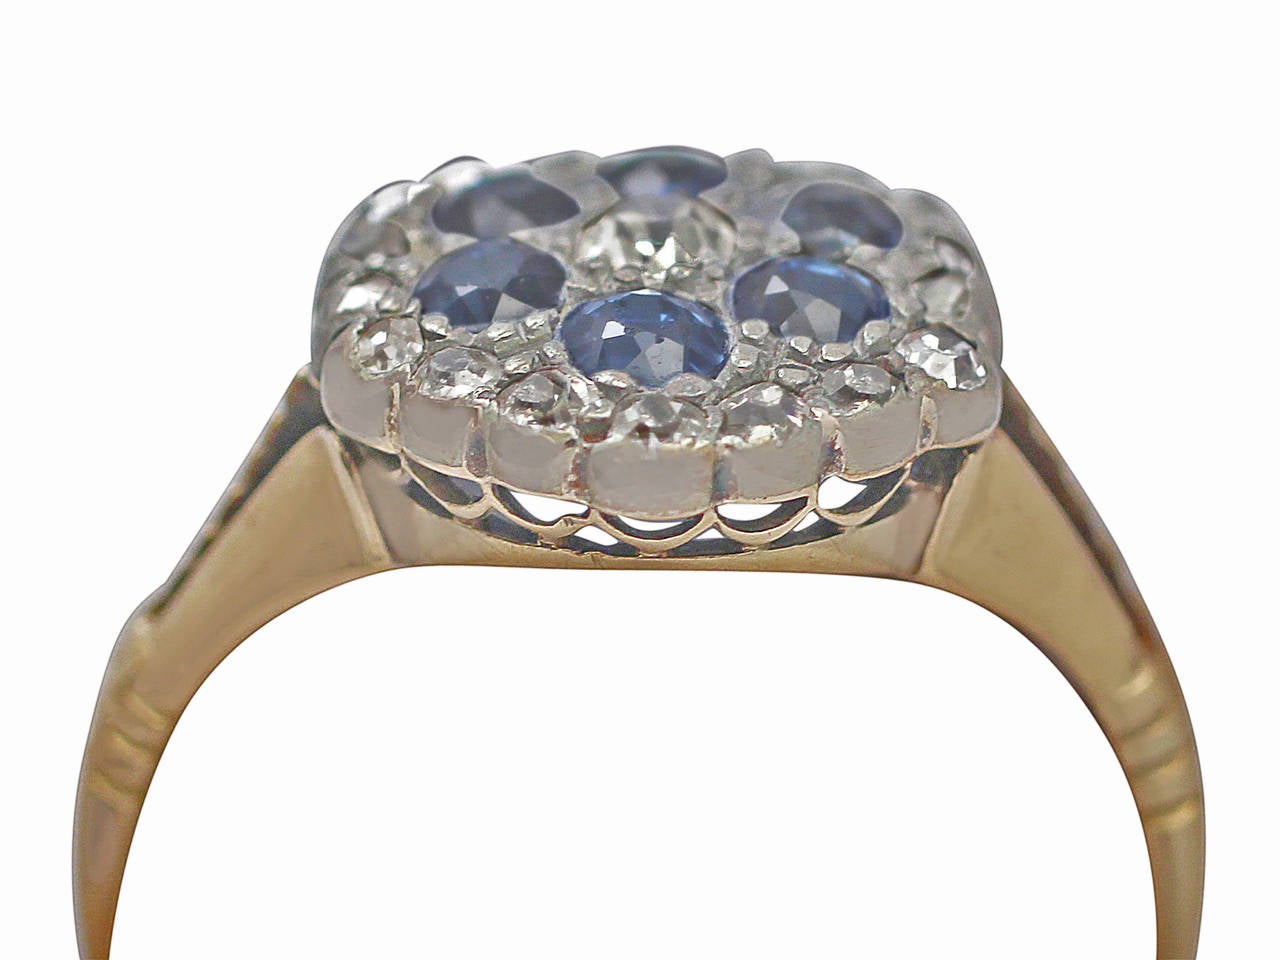 A fine antique 0.58 carat blue sapphire and 0.52 carat diamond, 18 karat yellow gold, platinum set cluster ring; part our antique jewelry and estate jewelry collections

This fine antique sapphire and diamond ring has been crafted in 18k yellow gold